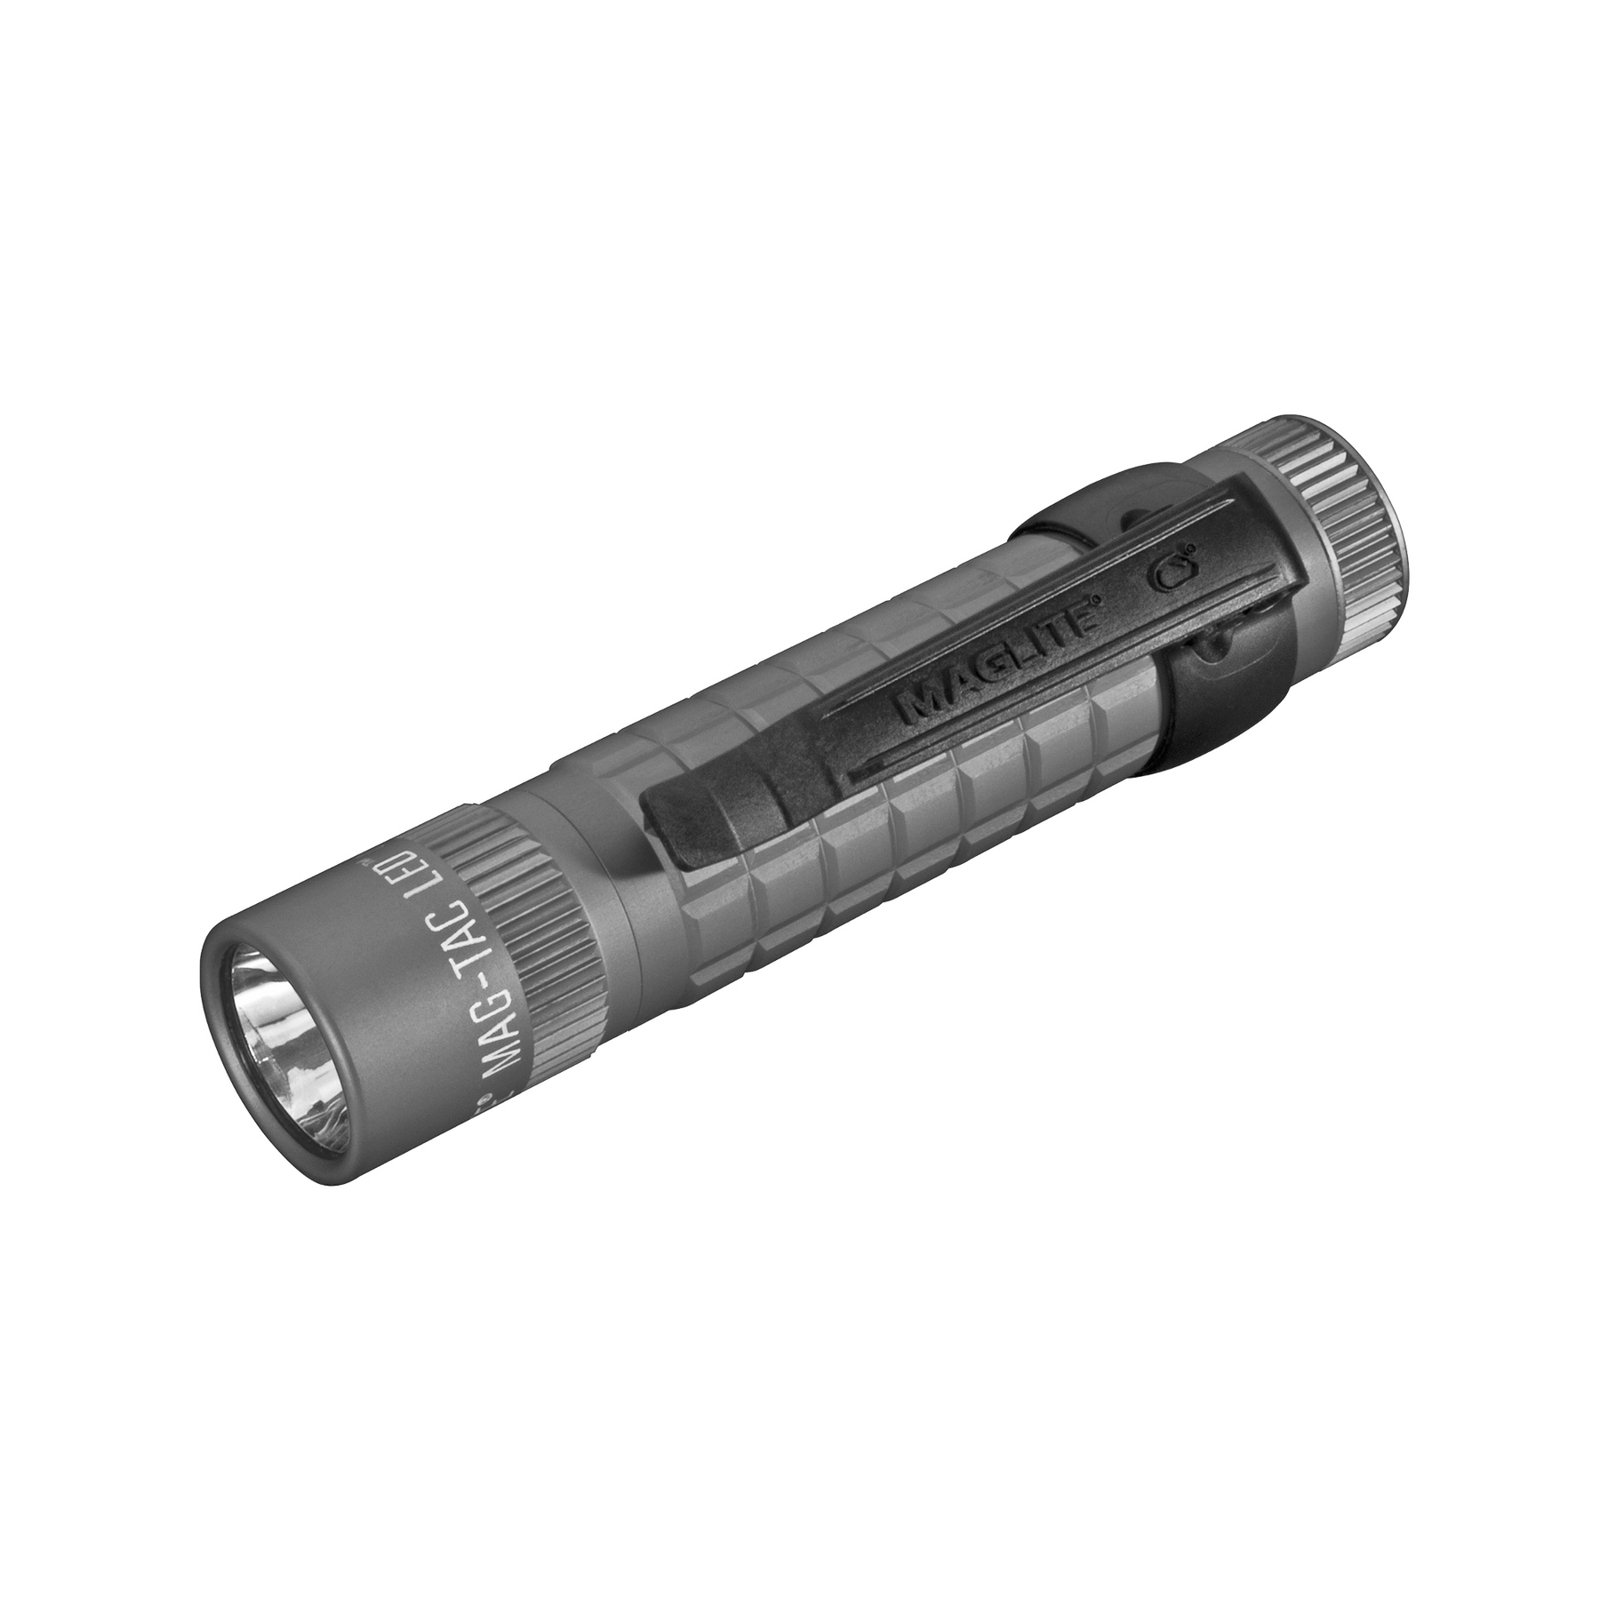 Torcia a LED Maglite Mag-Tac, 2 Cell CR123, grigio